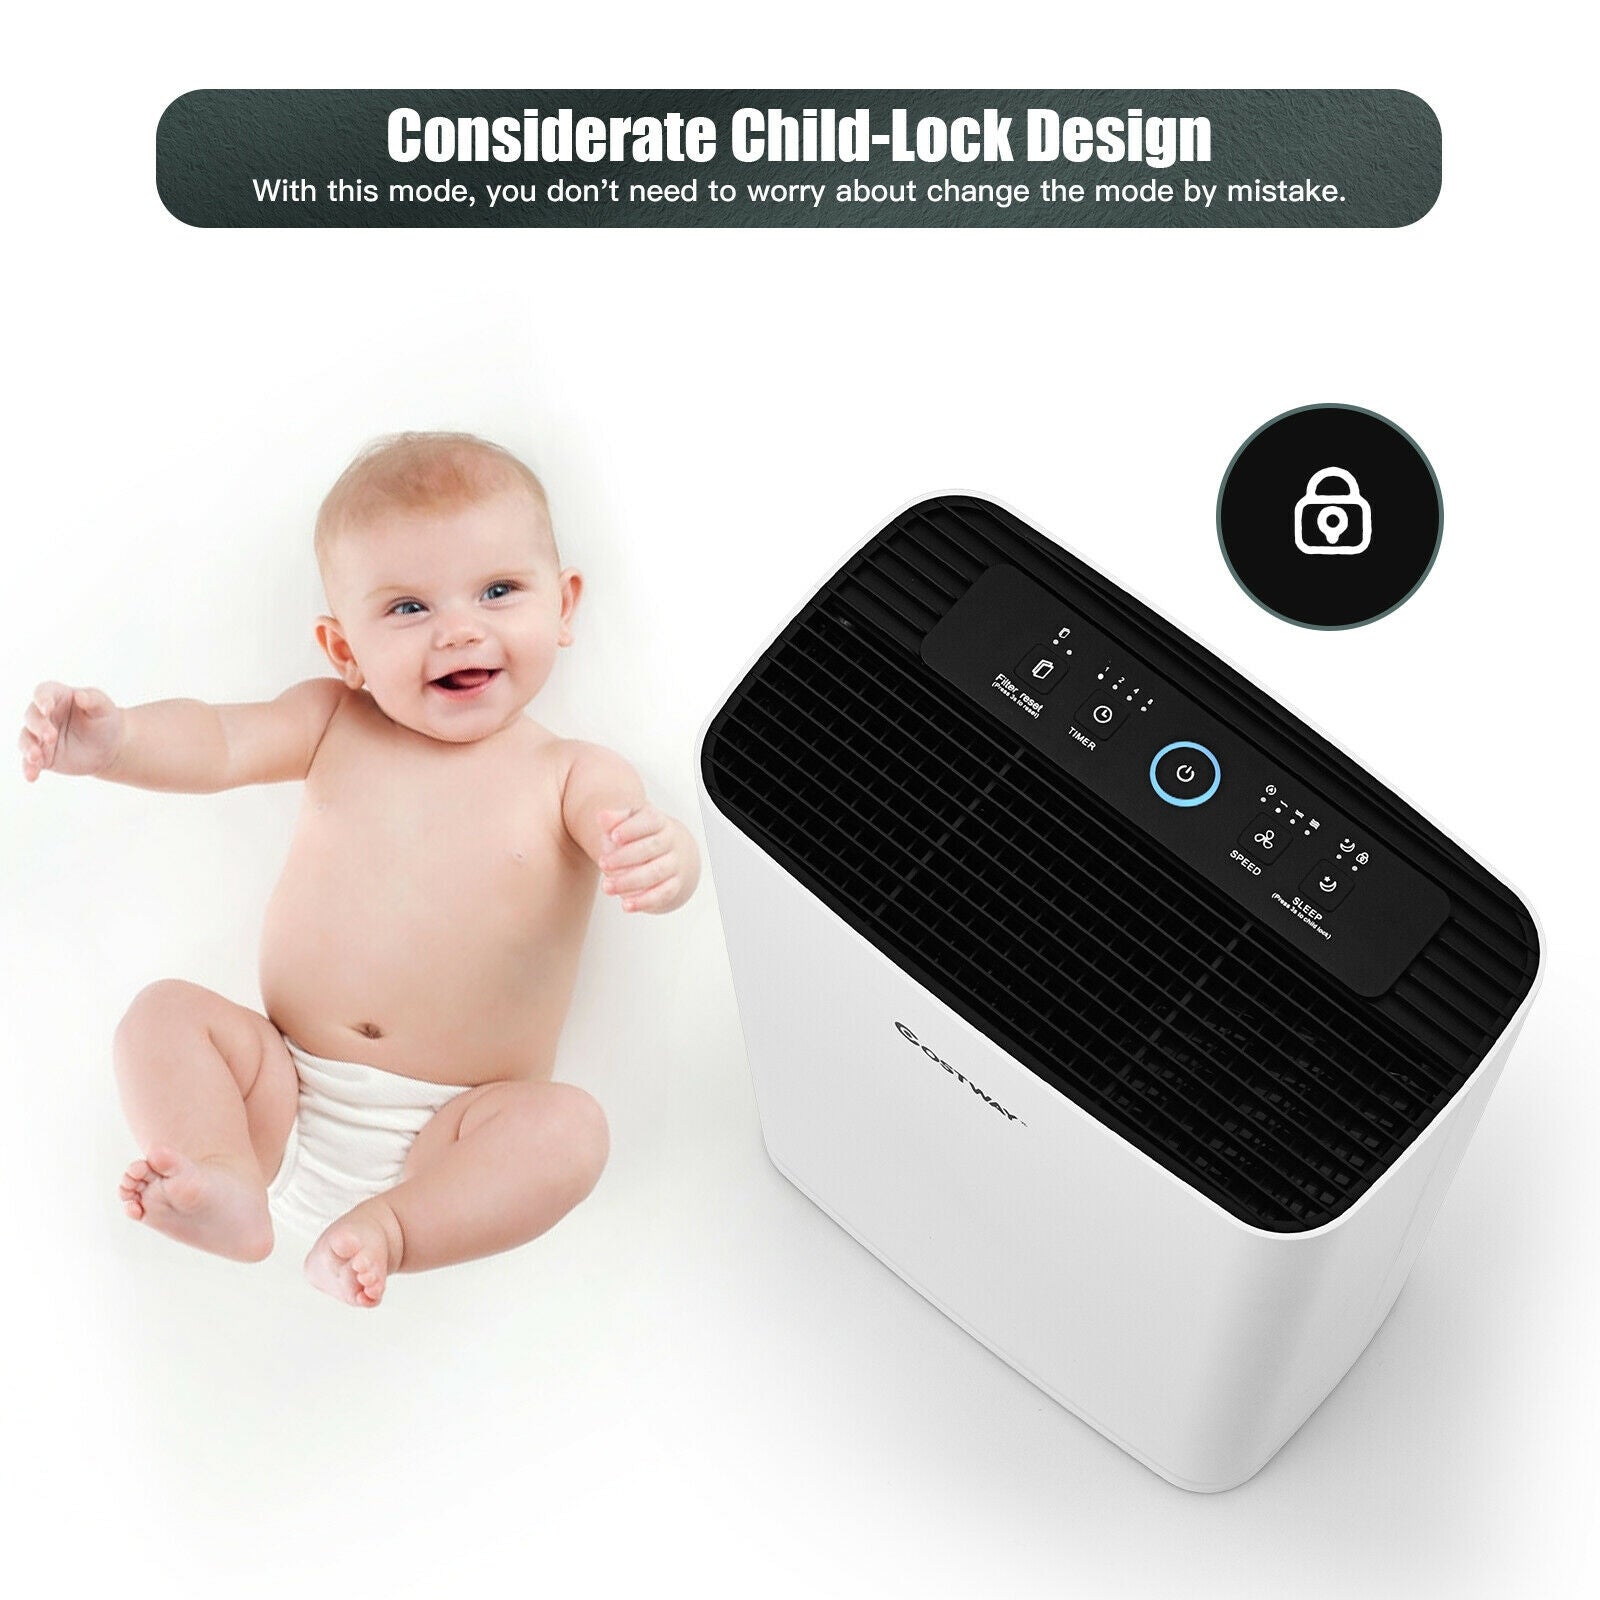 Timer and Child-Lock Function: The timer can be set for a duration of 1 to 8 hours, allowing you to maintain clean air while conserving energy, particularly during sleep. The child-lock mode ensures the air purifier remains unaffected by pets or children.